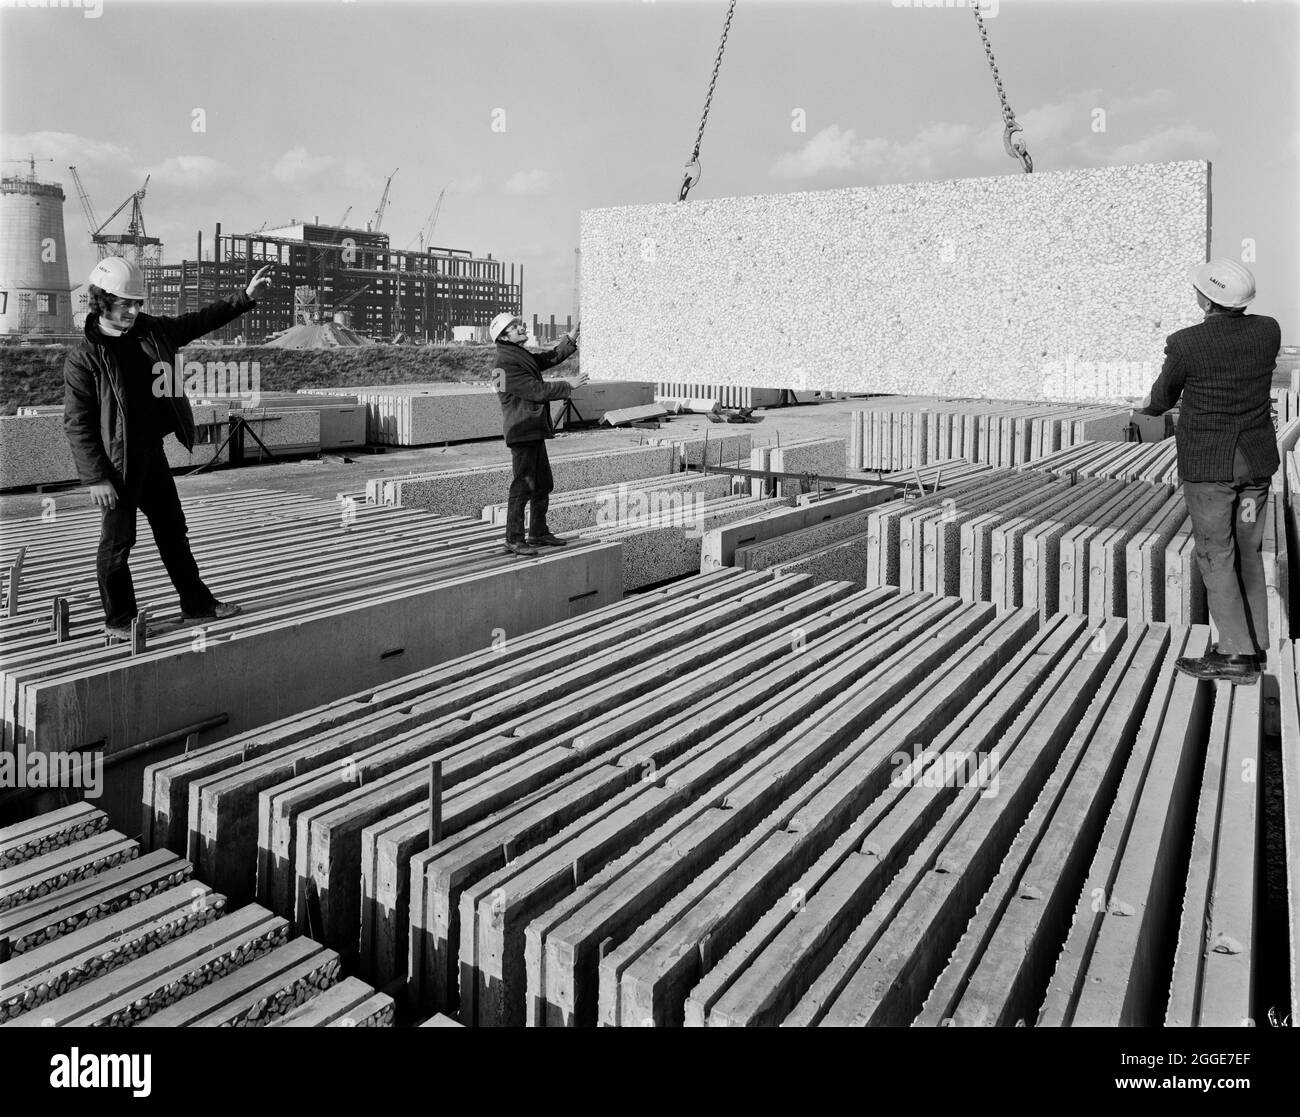 Laing workers assisting with the movement of a rectangular concrete slab at a stockpile on the construction site of the Isle of Grain Power Station. The Isle of Grain Power Station was an oil fired power station built in the 1970&#x2019;s by multiple contractors, including John Laing and Son Ltd. When the power station opened in 1979, it had the second tallest chimney in the UK at 244 metres high. The power station has now been demolished and the chimney was destroyed in September 2016. A new Combined Cycle Gas Turbine (CCGT) power station has been built at the site. Stock Photo